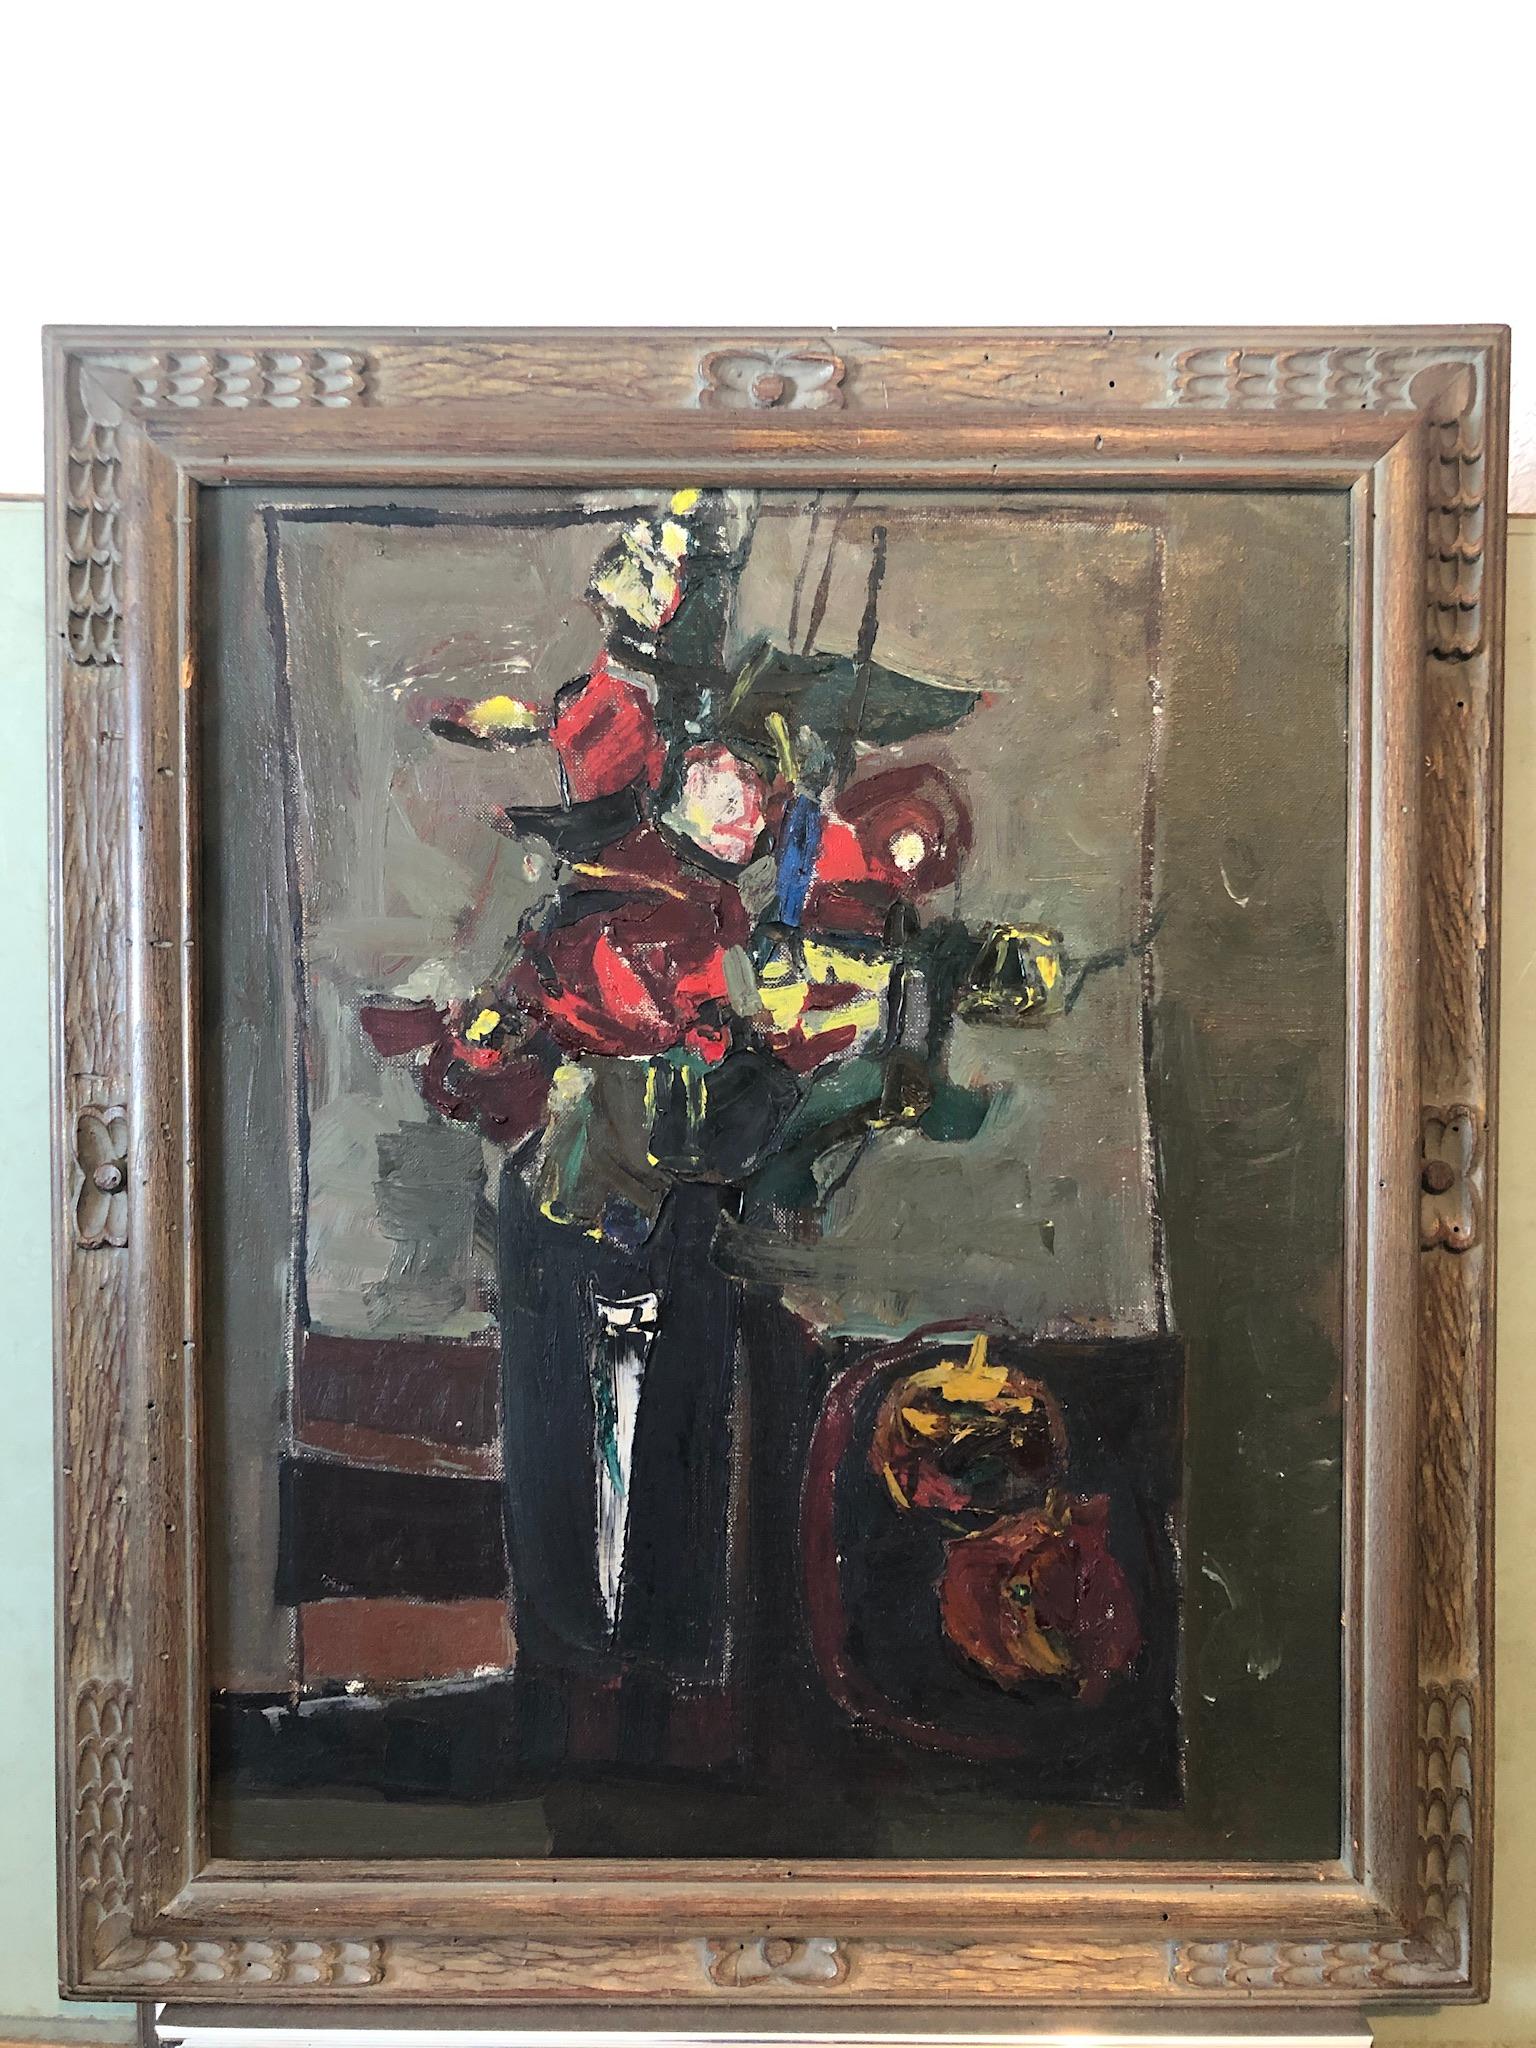 Bold, colorful abstract bouquet of flowers in a vase.
 29.5 X 25.5 inches, framed.  24 X 20 canvas in original carved wood frame.
Provenance: Gallery hadassa (Klachkin) Tel Aviv. Bears label remnant verso.

Zvi Mairovich (1911-1974) was one of the